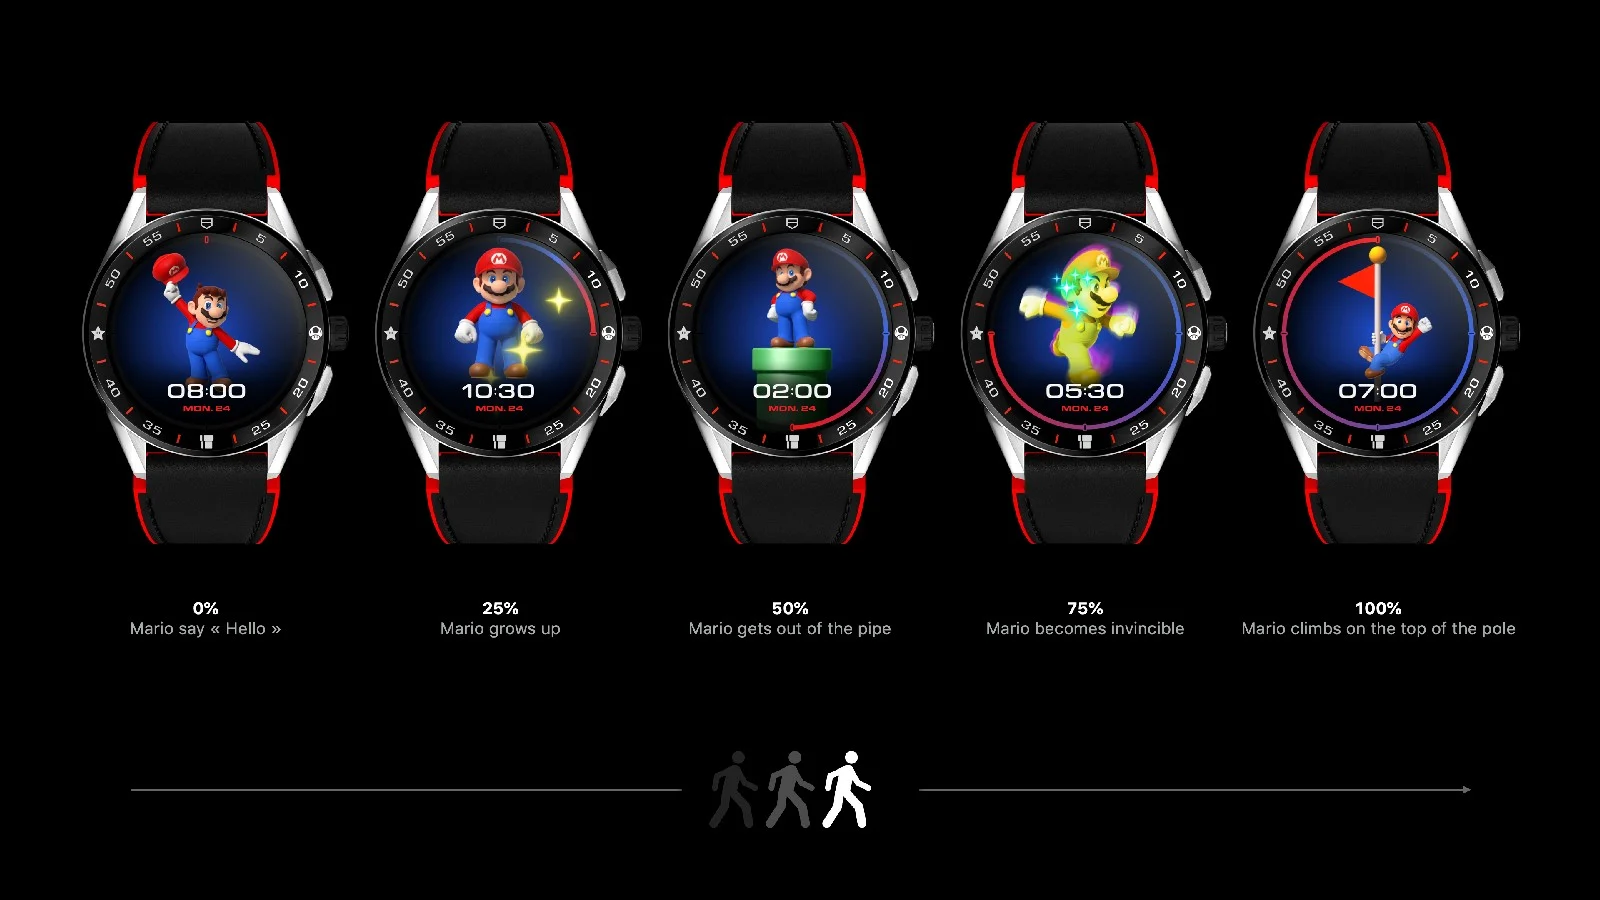 Five of the Tag Heuer Connected Limited Edition Super Mario watches with black-and-red straps. Each of them shows a different Mario image at different times of day.